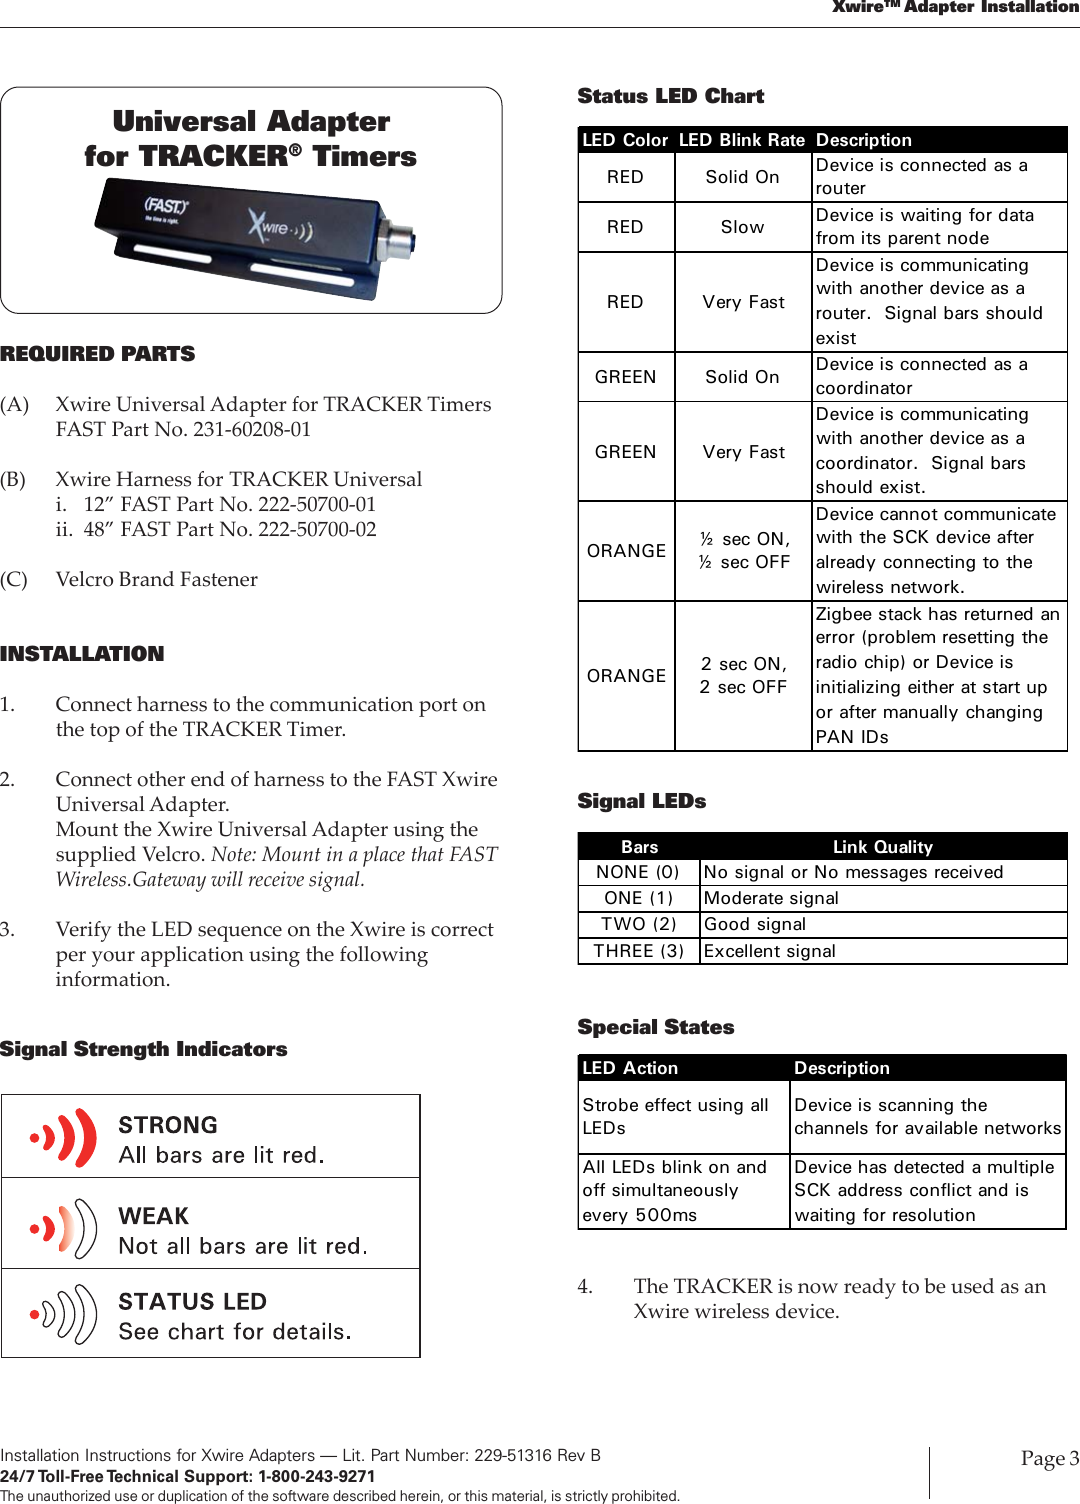 Installation Instructions for Xwire Adapters — Lit. Part Number: 229-51316 Rev B24/7 Toll-Free Technical  Support:  1-800-243-9271The unauthorized use or duplication of the software described herein, or this material, is strictly prohibited.Page 3XwireTM Adapter InstallationREQUIRED PARTS(A) Xwire Universal Adapter for TRACKER TimersFAST Part No. 231-60208-01(B) Xwire Harness for TRACKER Universali. 12” FAST Part No. 222-50700-01ii. 48” FAST Part No. 222-50700-02(C) Velcro Brand FastenerINSTALLATION1. Connect harness to the communication port onthe top of the TRACKER Timer.2. Connect other end of harness to the FAST XwireUniversal Adapter.Mount the Xwire Universal Adapter using thesupplied Velcro. Note: Mount in a place that FASTWireless.Gateway will receive signal.3. Verify the LED sequence on the Xwire is correctper your application using the followinginformation.Signal Strength IndicatorsUniversal Adapterfor TRACKER® TimersSignal LEDsSpecial StatesBars Link QualityNONE (0) No signal or No messages receivedONE (1) Moderate signalTWO (2) Good signalTHREE (3) Excellent signalLED Action DescriptionStrobe effect using all LEDsDevice is scanning the channels for available networksAll LEDs blink on and off simultaneously every 500msDevice has detected a multiple SCK address conflict and is waiting for resolution4. The TRACKER is now ready to be used as anXwire wireless device.Status LED ChartLED Color LED Blink Rate DescriptionRED Solid On Device is connected as a routerRED Slow  Device is waiting for data from its parent nodeRED Very FastDevice is communicating with another device as a router. Signal bars should existGREEN Solid On Device is connected as a coordinatorGREEN Very FastDevice is communicating with another device as a coordinator. Signal bars should exist.ORANGE ½ sec ON, ½ sec OFFDevice cannot communicate with the SCK device after already connecting to the wireless network.ORANGE 2 sec ON, 2 sec OFFZigbee stack has returned an error (problem resetting the radio chip) or Device is initializing either at start up or after manually changing PAN IDs